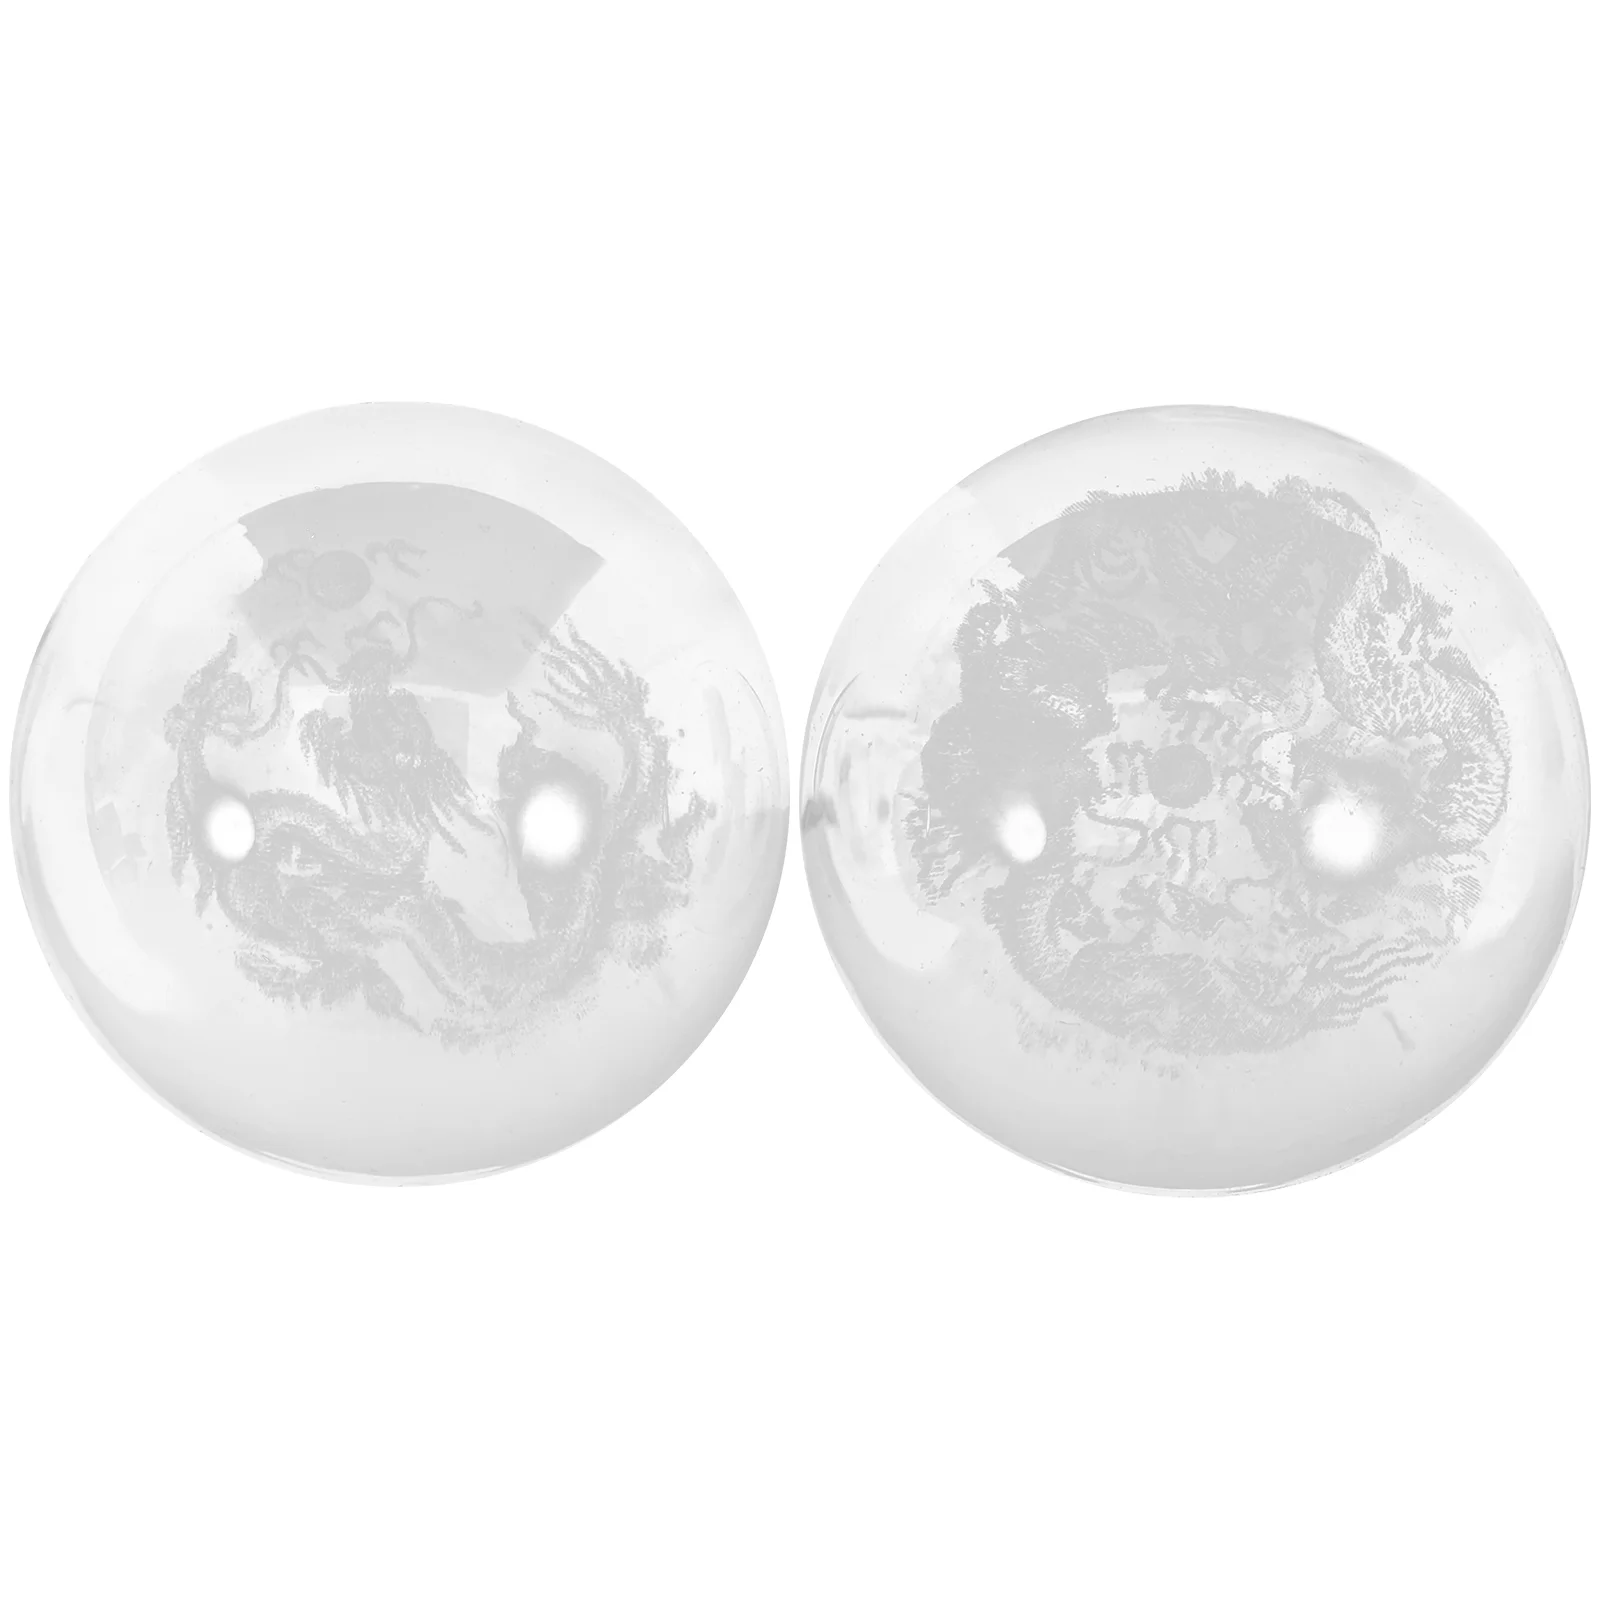 2pcs Handheld Massage Balls Portable Balls Smooth  Massage Balls Hand Playing Balls filter for deerma vc01 handheld vacuum cleaner accessories replacement filter portable dust collector 2pcs filter for deer